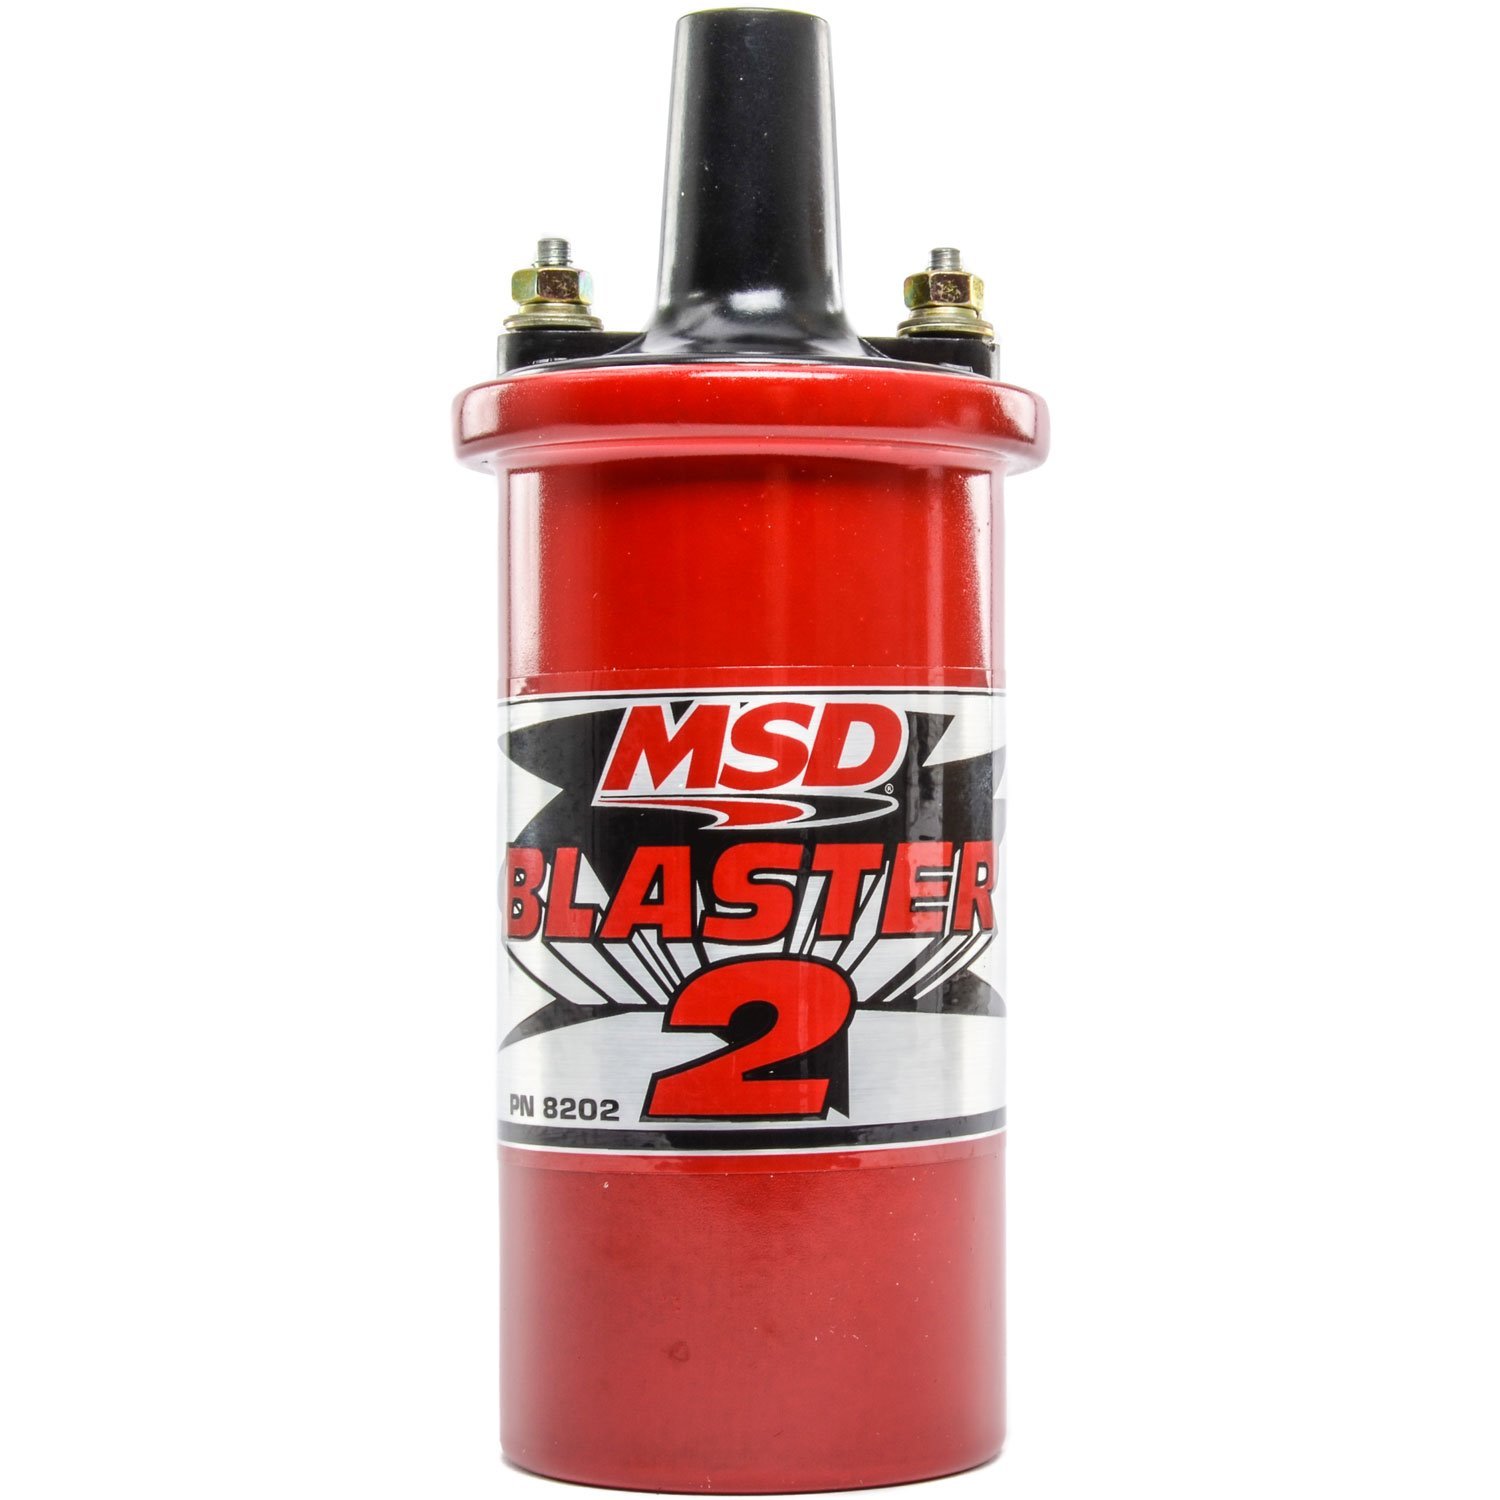 Red Blaster 2 Coil For MSD Ignitions